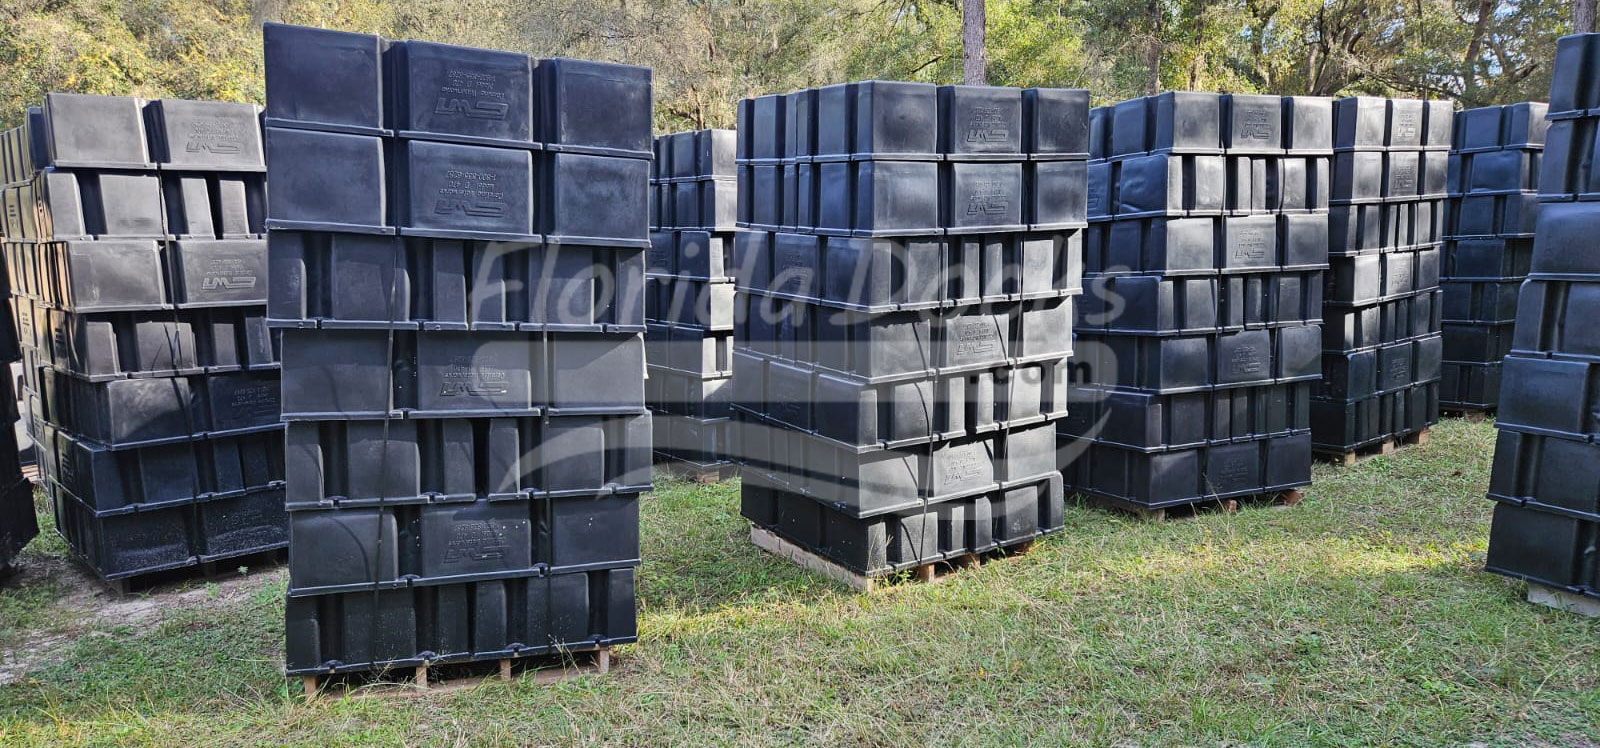 Dock Floats in Cocoa Beach - carolina waterworks permafloats quality floating docks pallet pricing and bulk discounts - by Florida Docks 